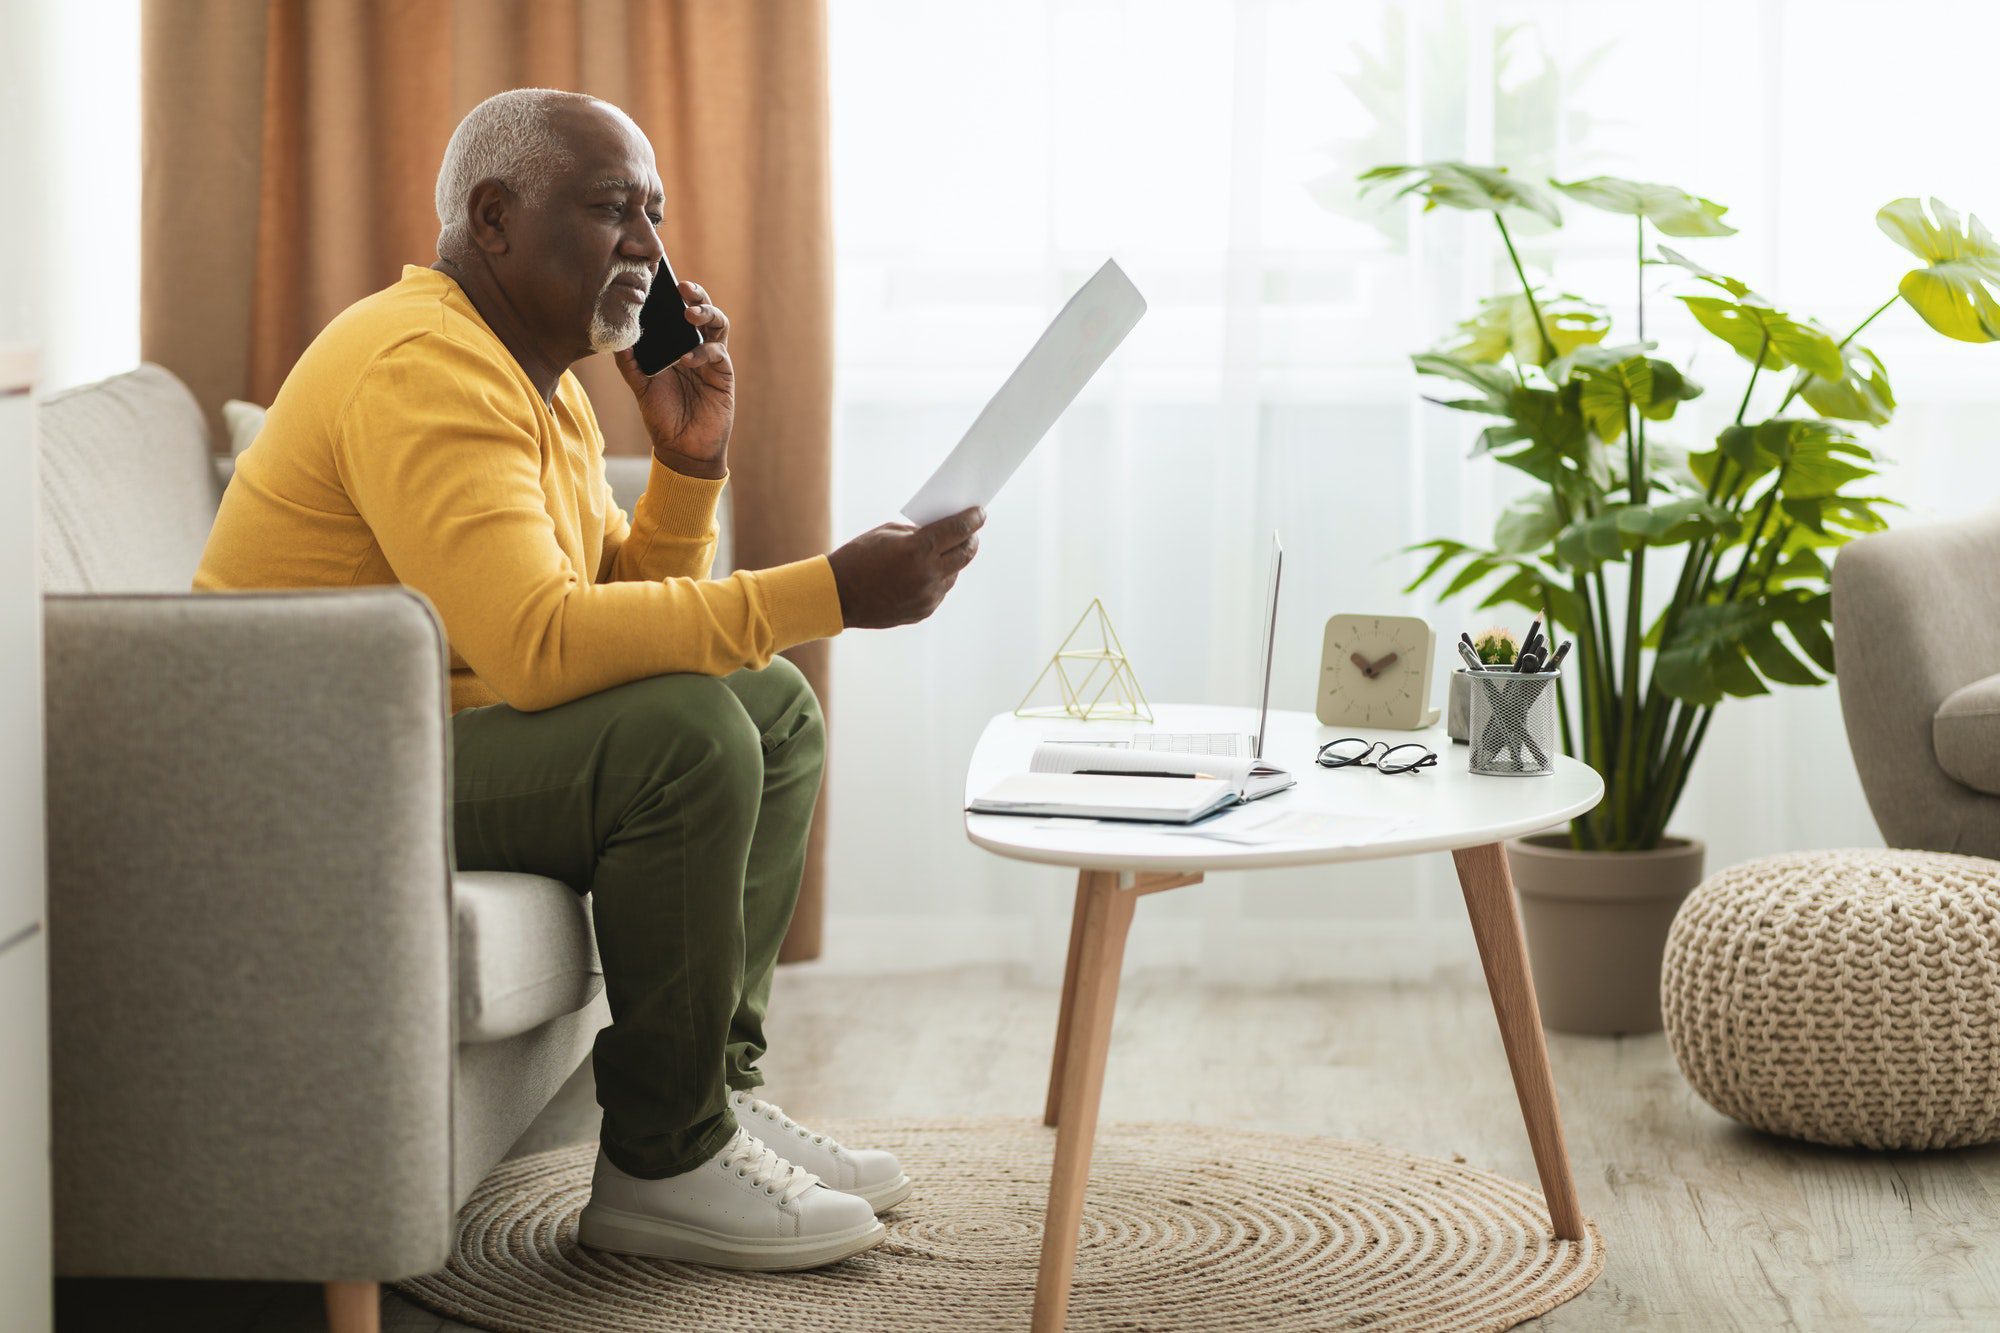 Senior African Businessman Talking On Phone Holding Paper Indoors, Side-View wondering if he has Medicare Eligibility Requirements